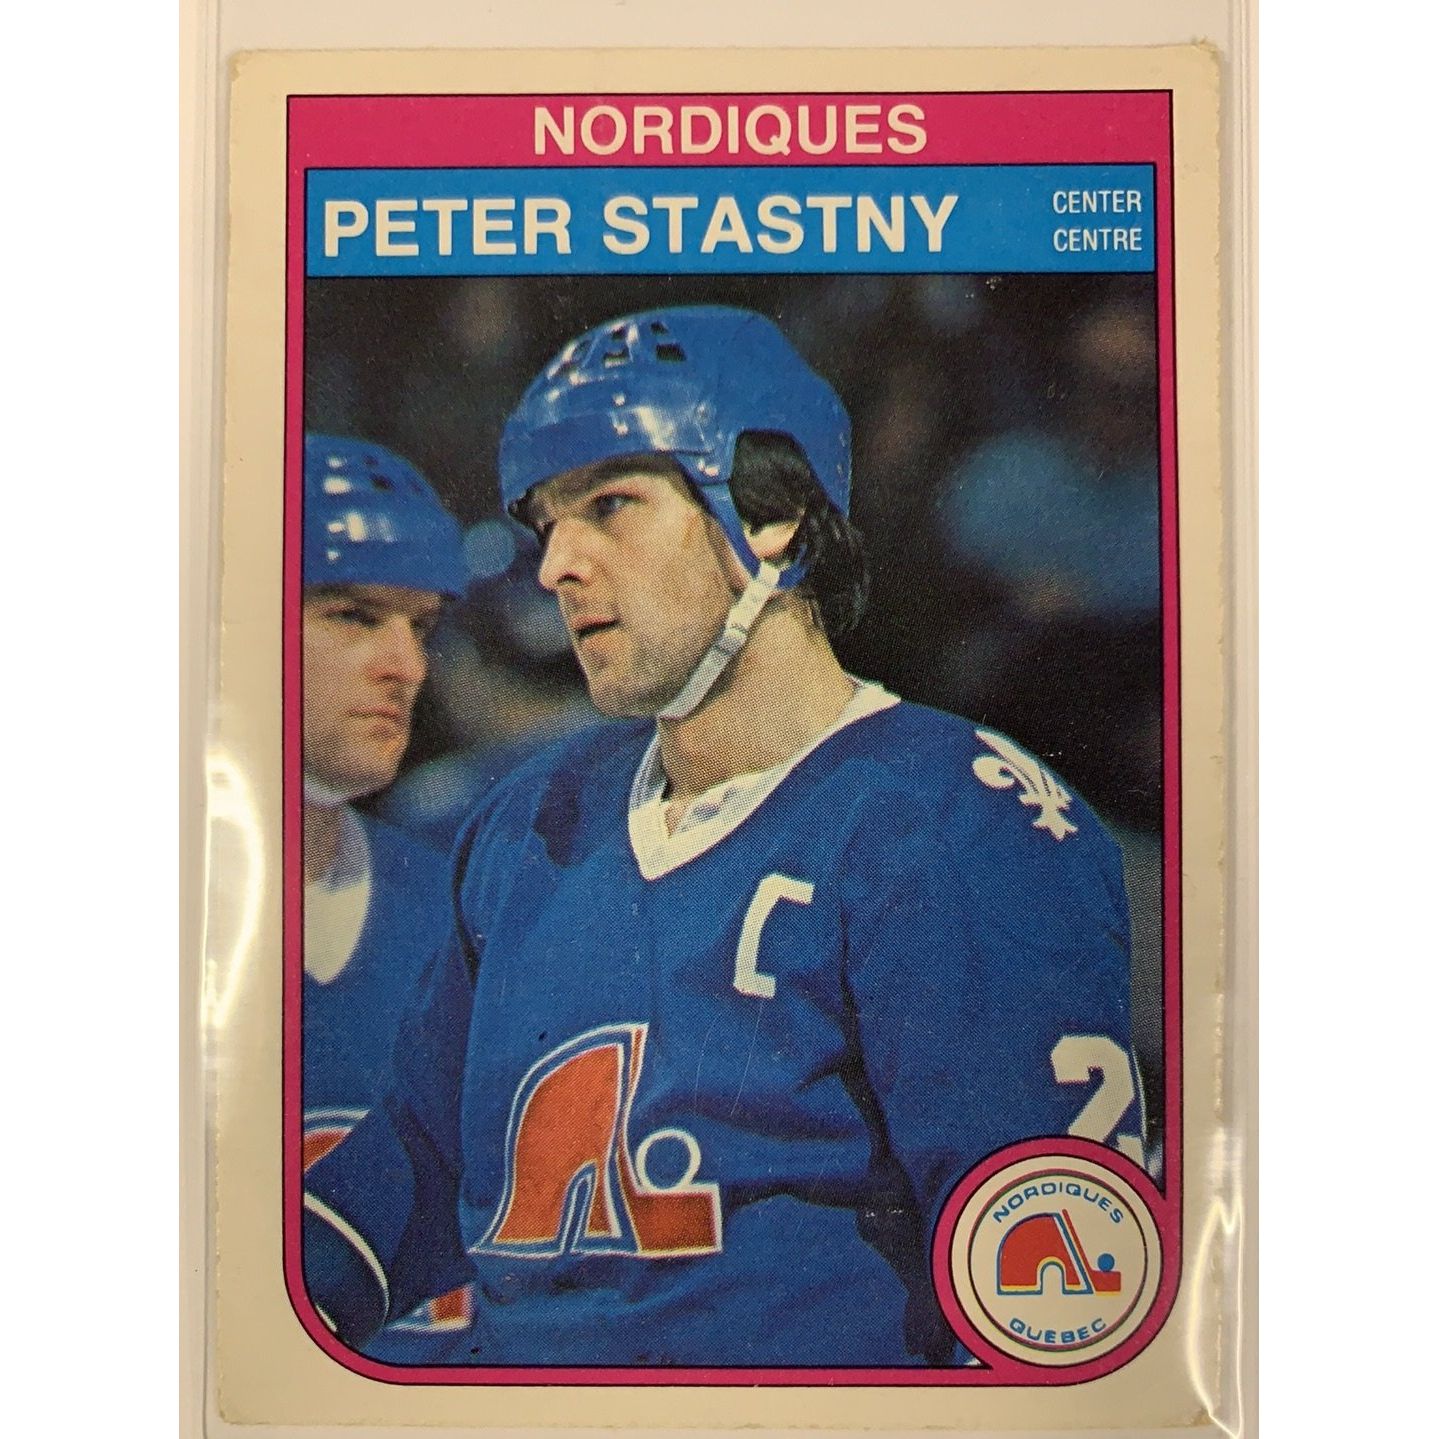  1982-83 O-Pee-Chee Peter Stastny Base #292  Local Legends Cards & Collectibles